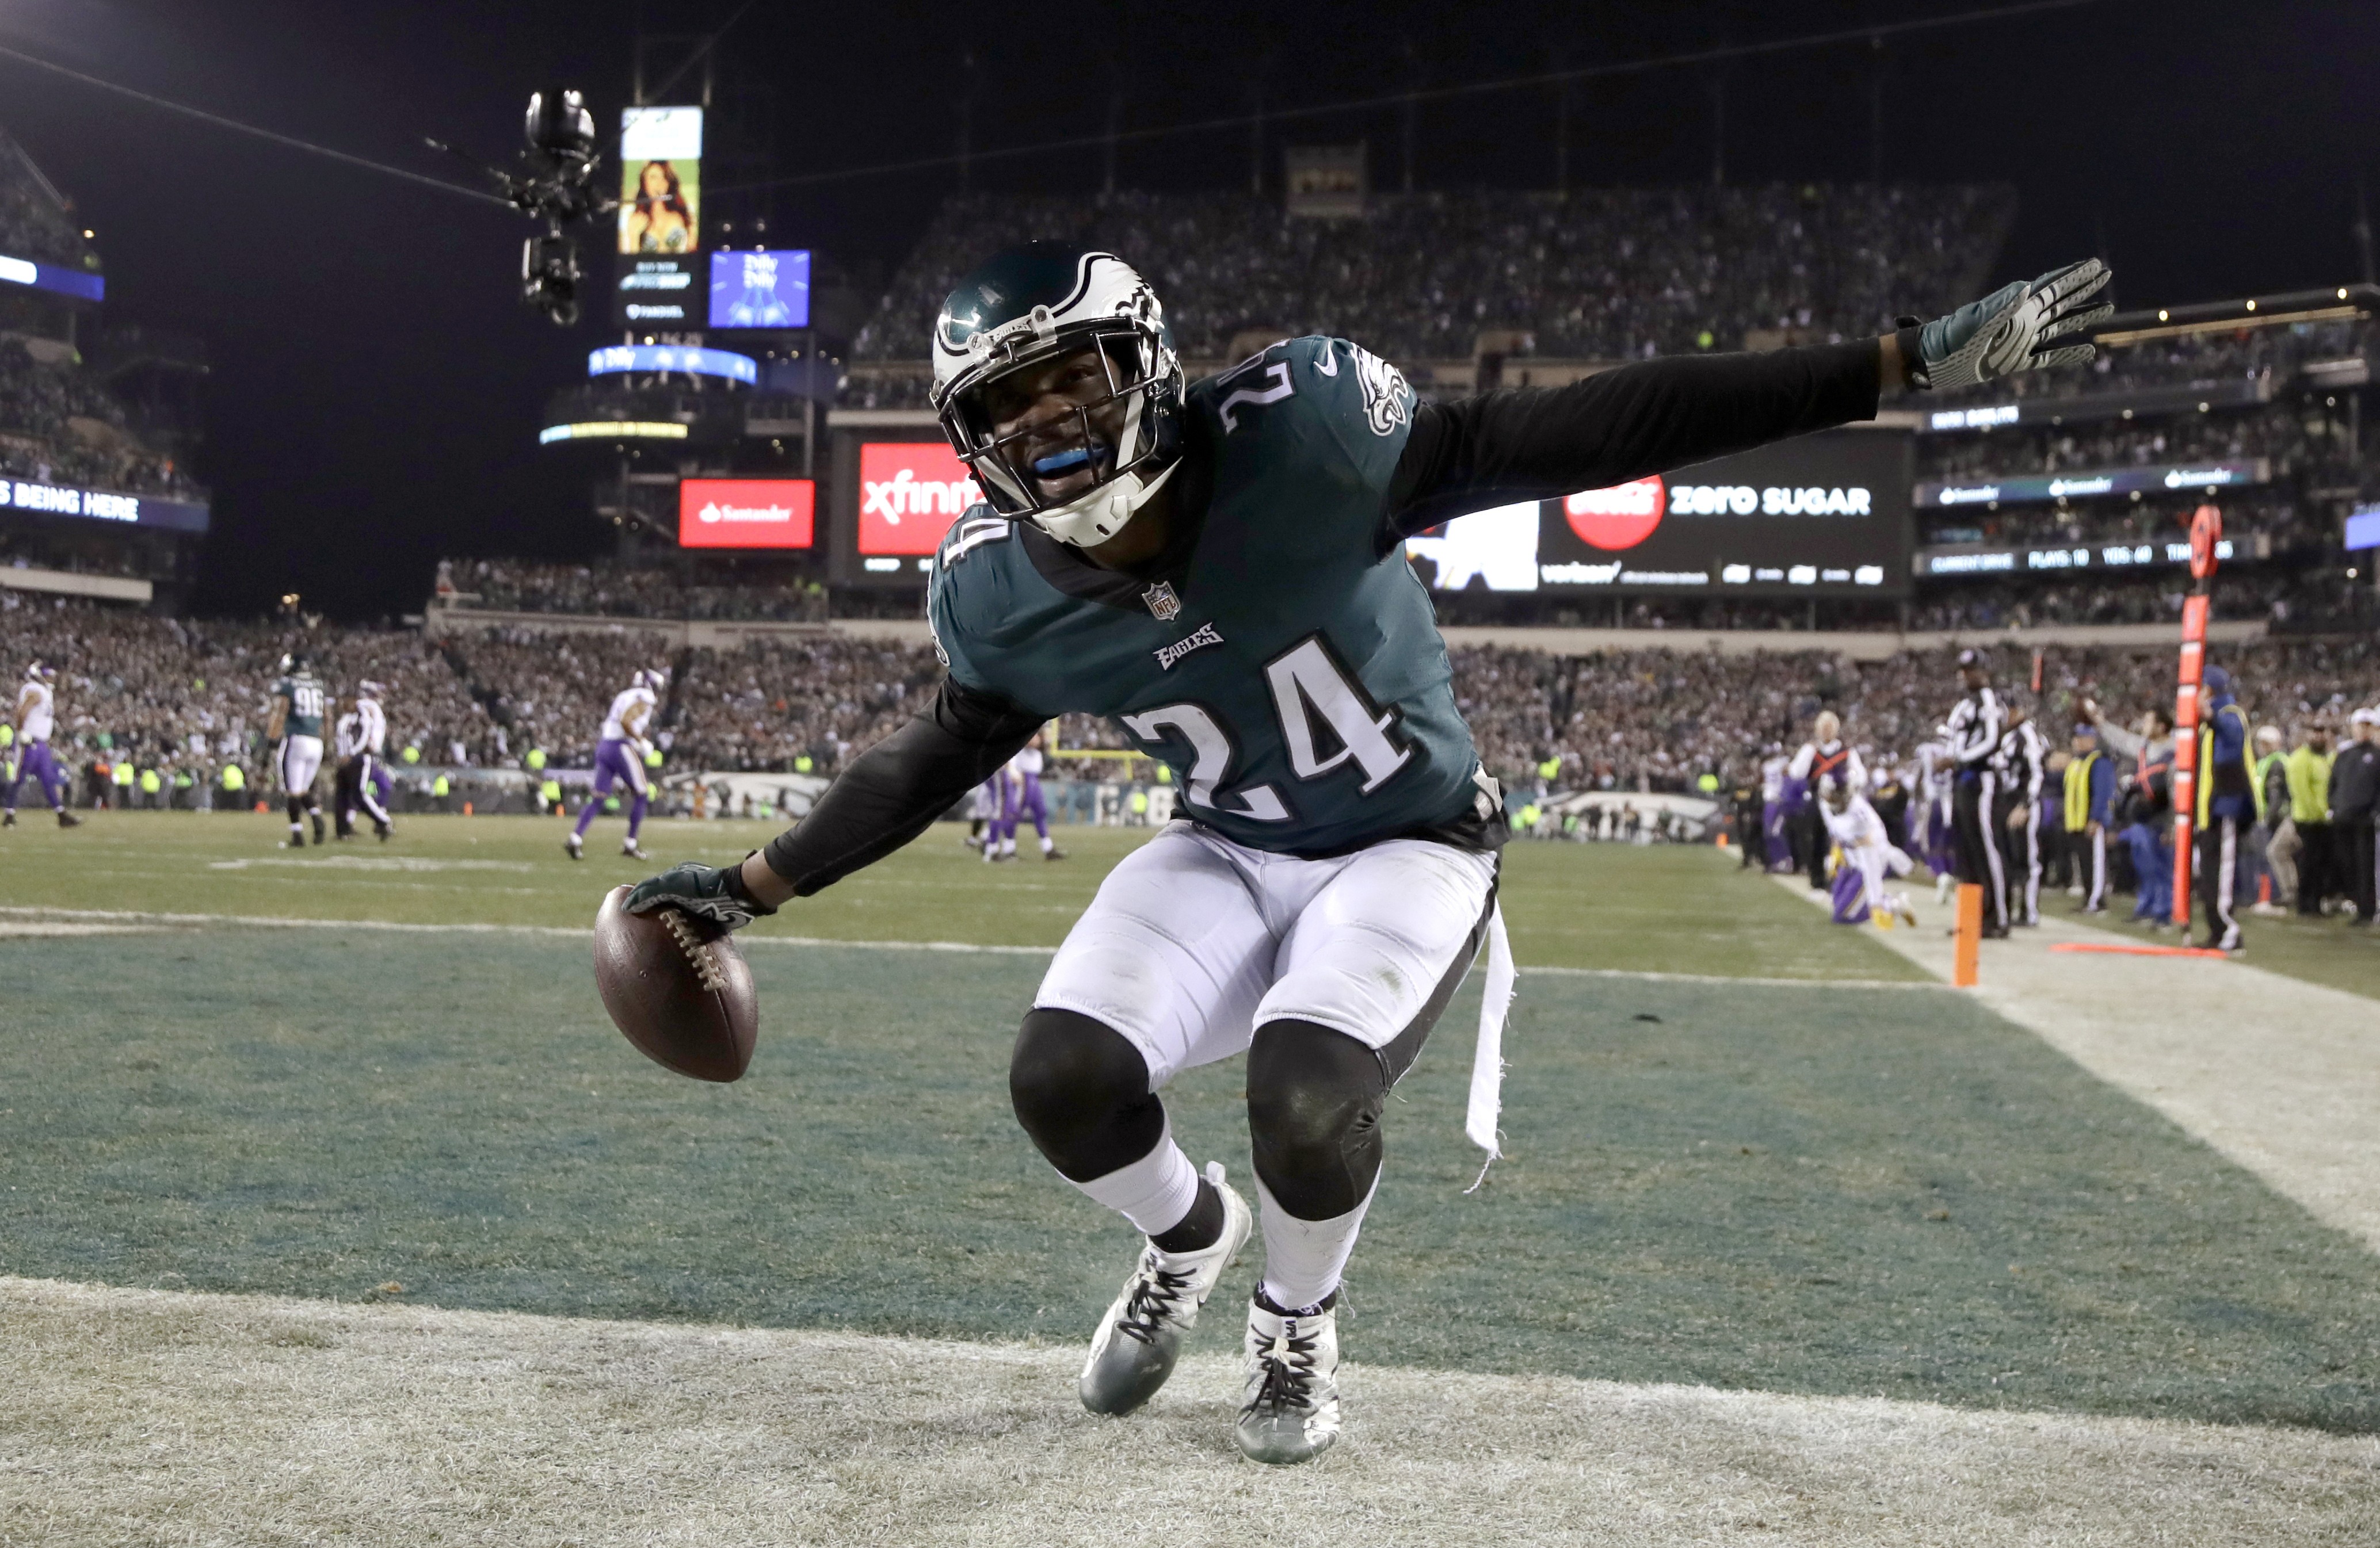 Philadelphia Eagles fly into Super Bowl after routing Minnesota